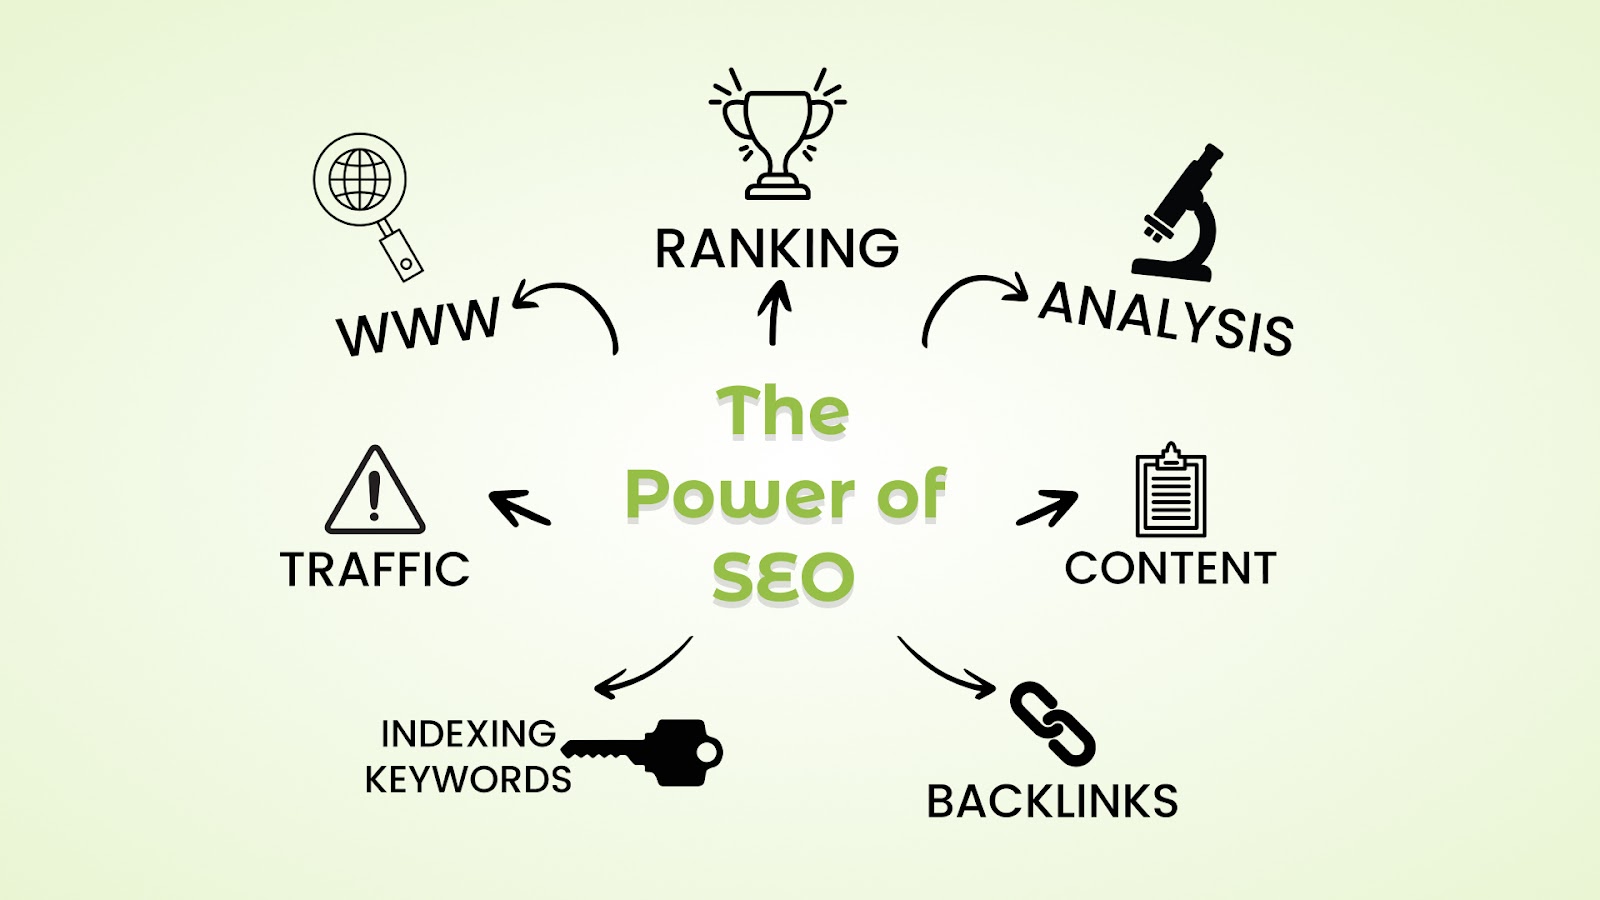 The advantages of SEO over paid advertising